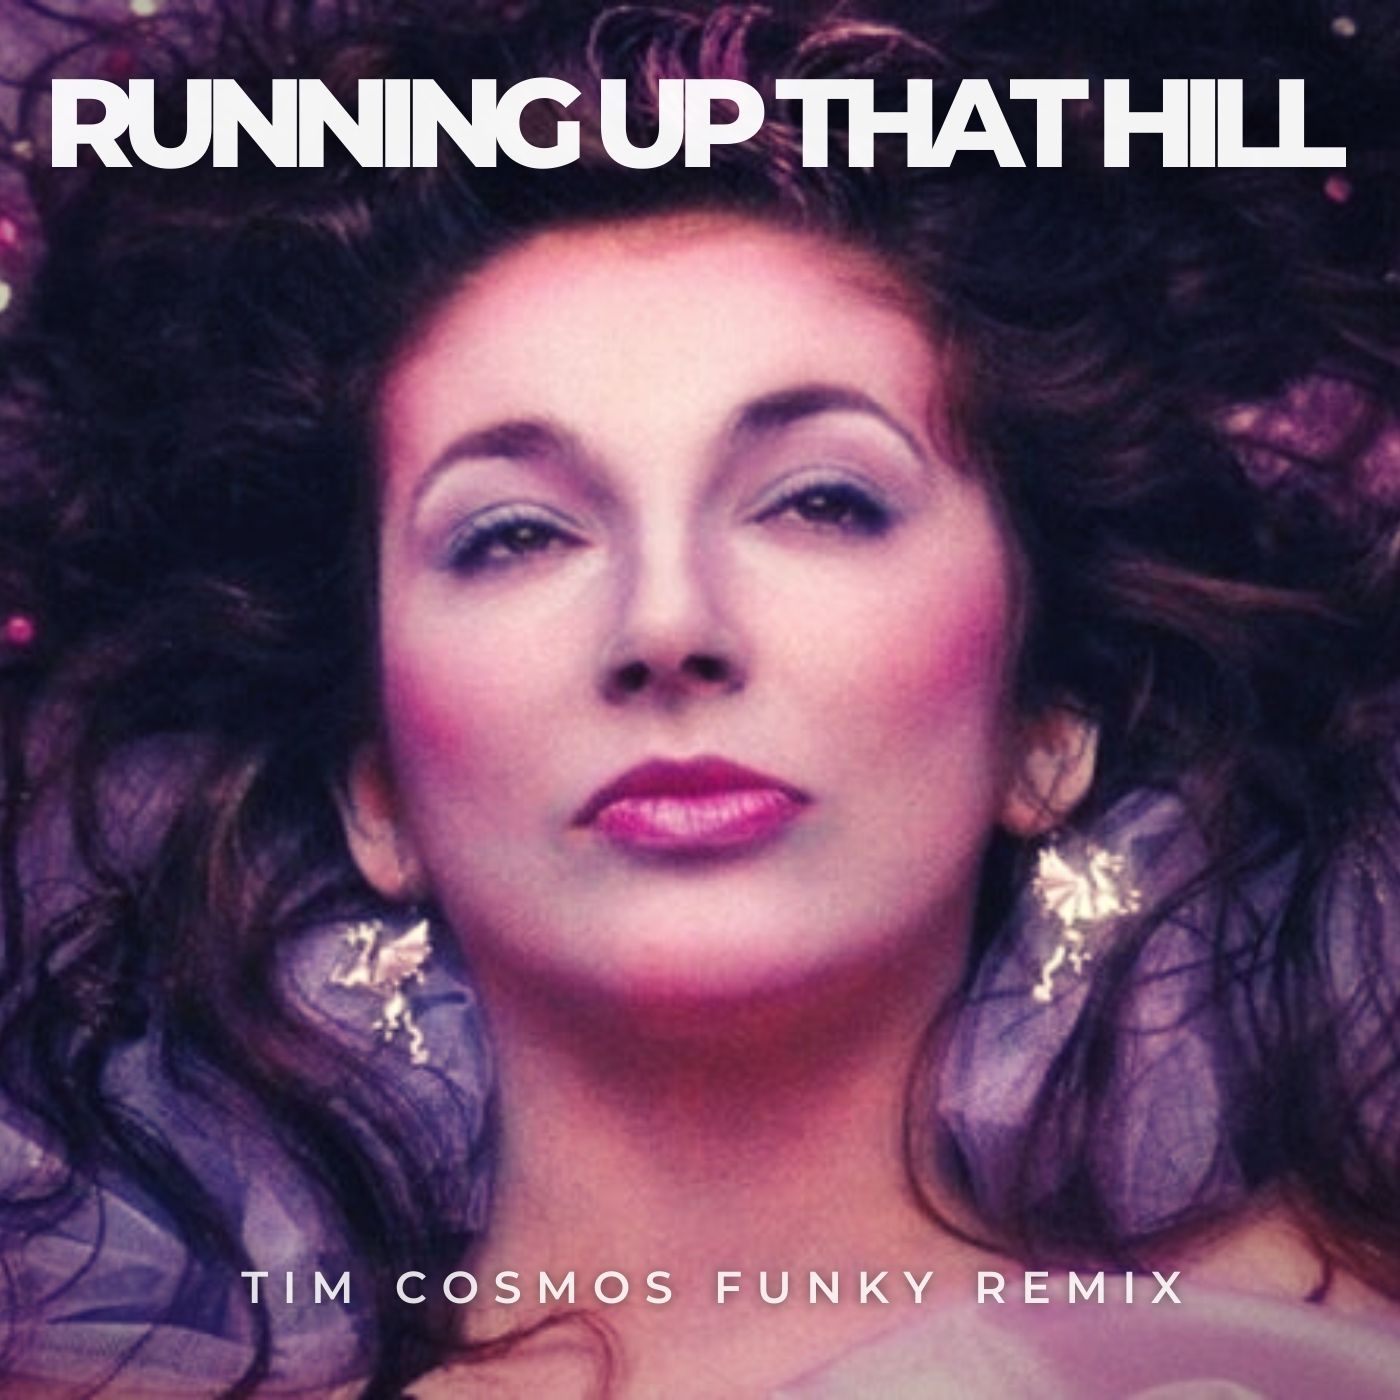 Download Kate Bush - Running Up That Hill (Tim Cosmos Funky Remix) [HYPEDDIT #01 NUDISCO CHART]